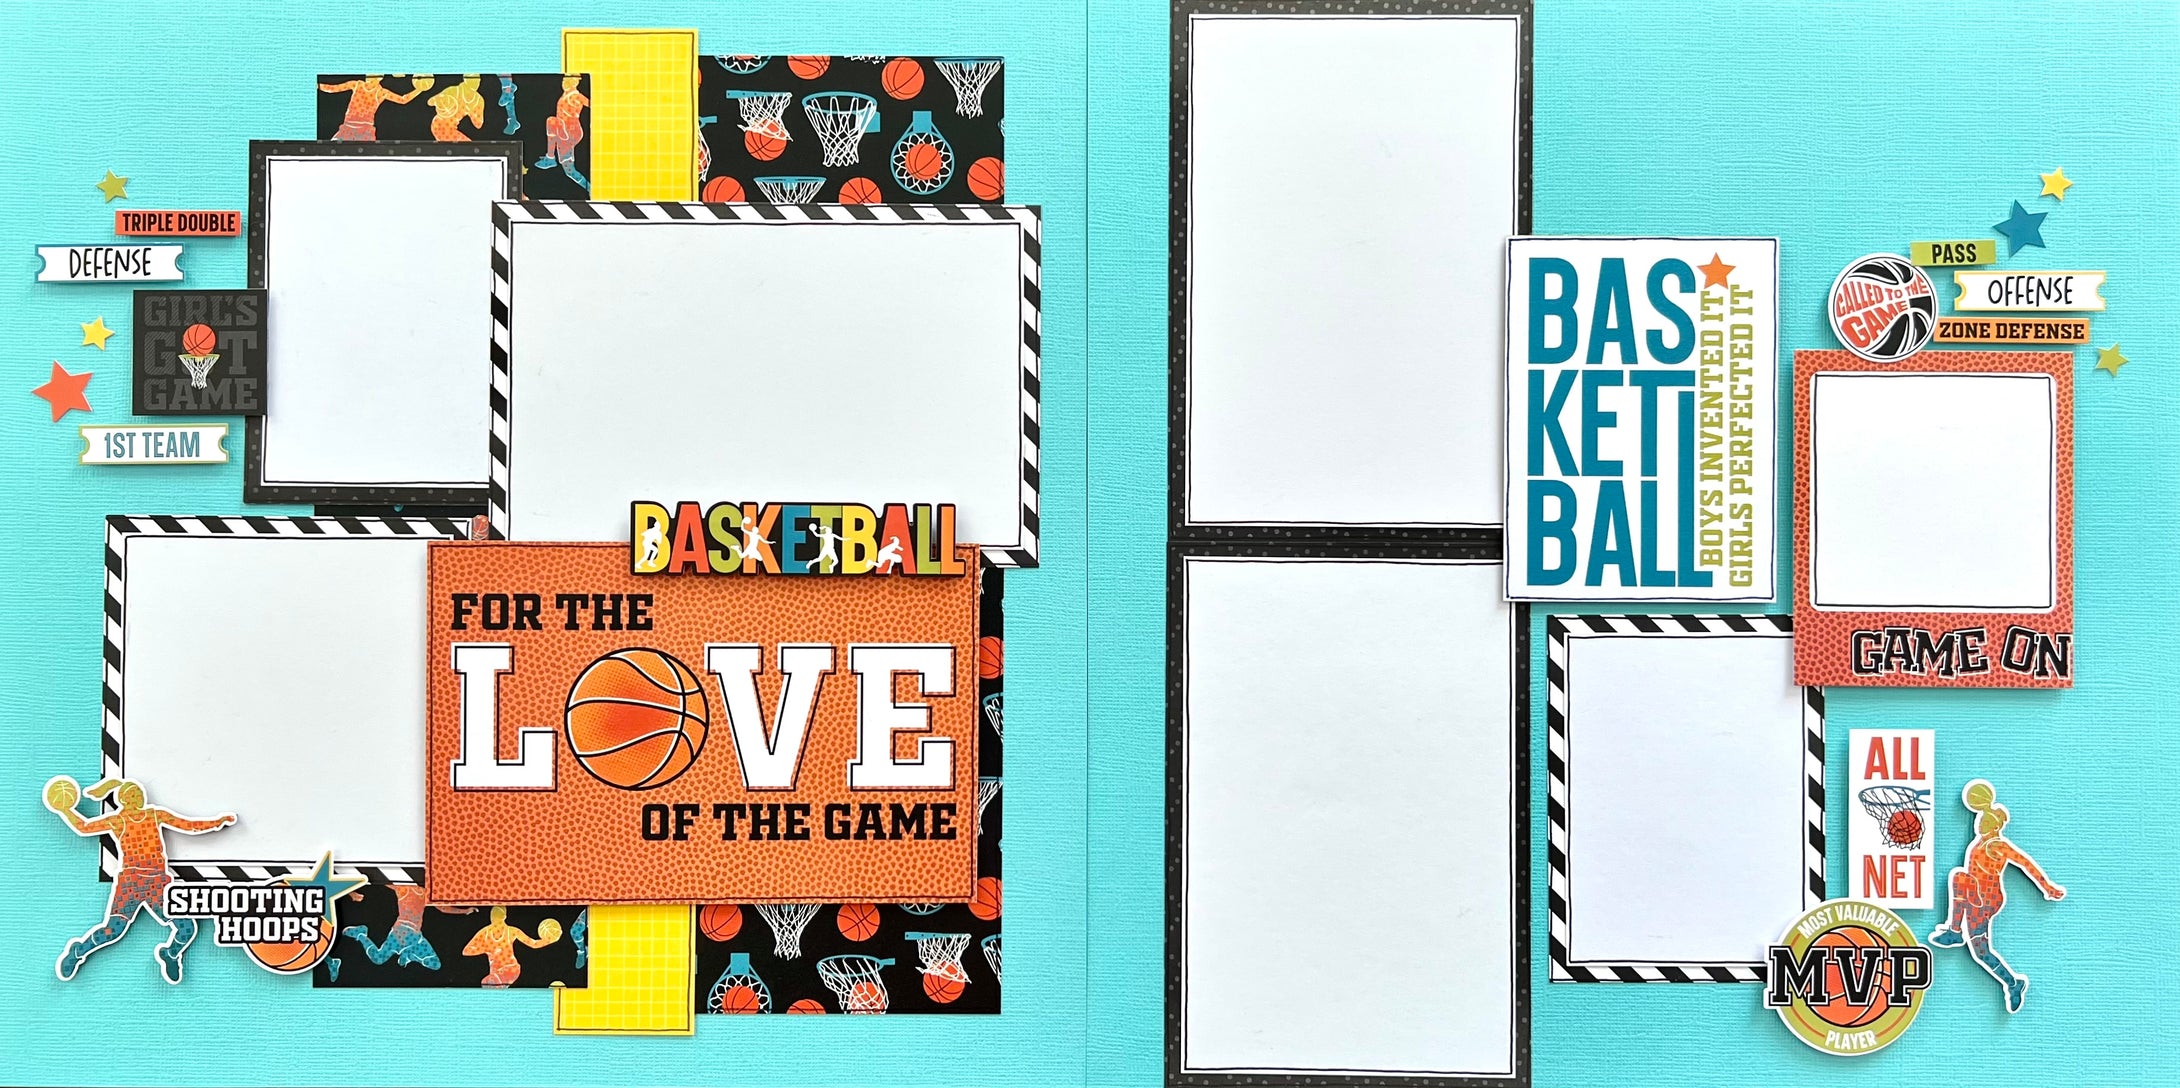 ** PRE-ORDER ** FOR THE LOVE OF THE GAME